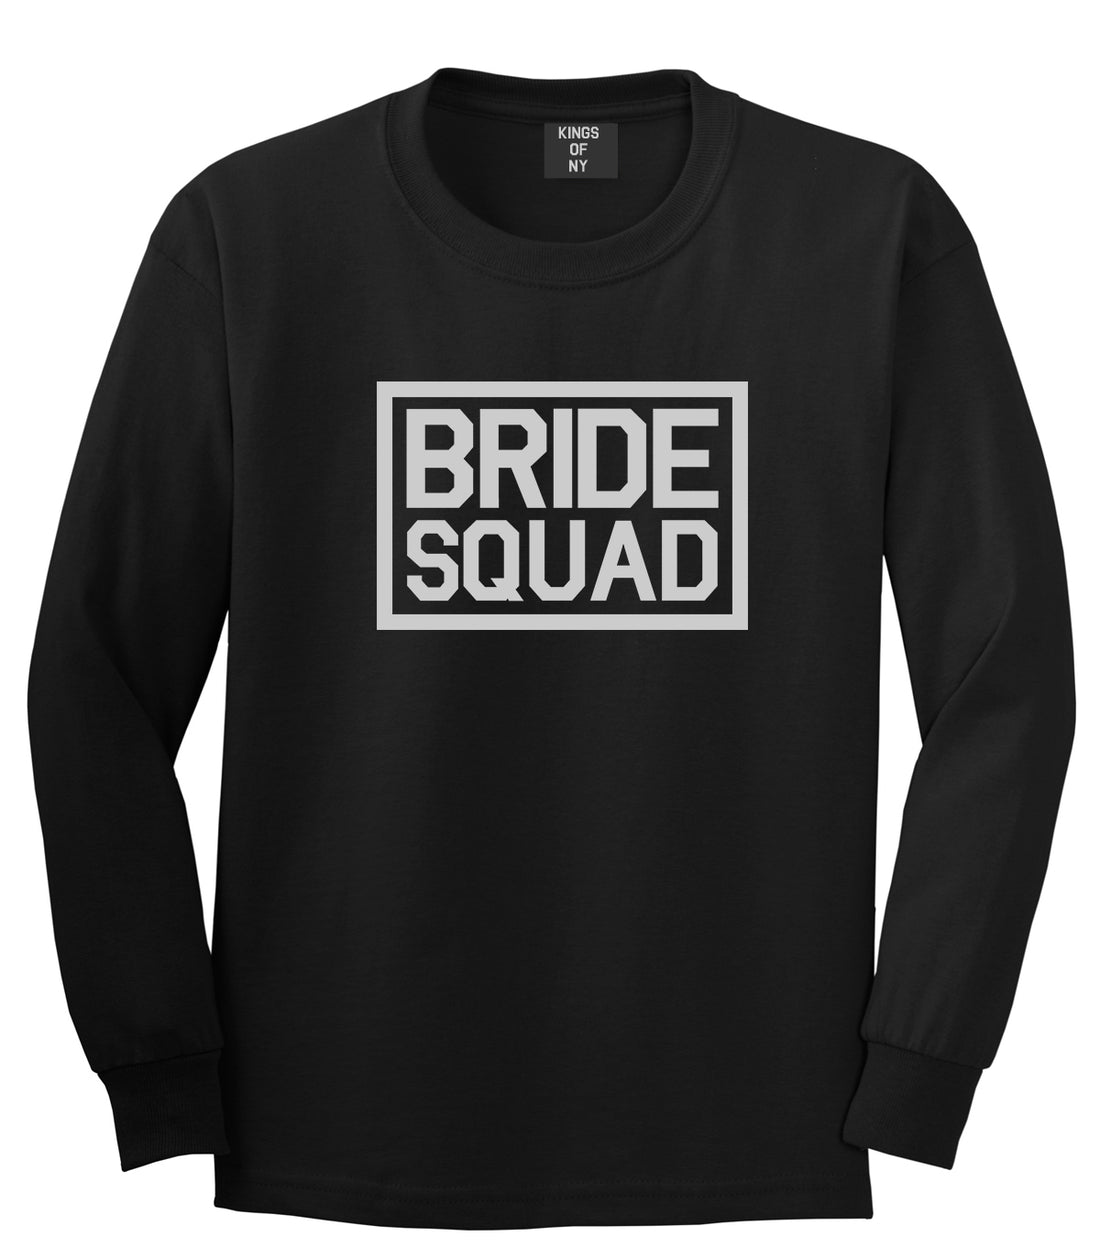 Bride Squad Bachlorette Party Black Long Sleeve T-Shirt by Kings Of NY